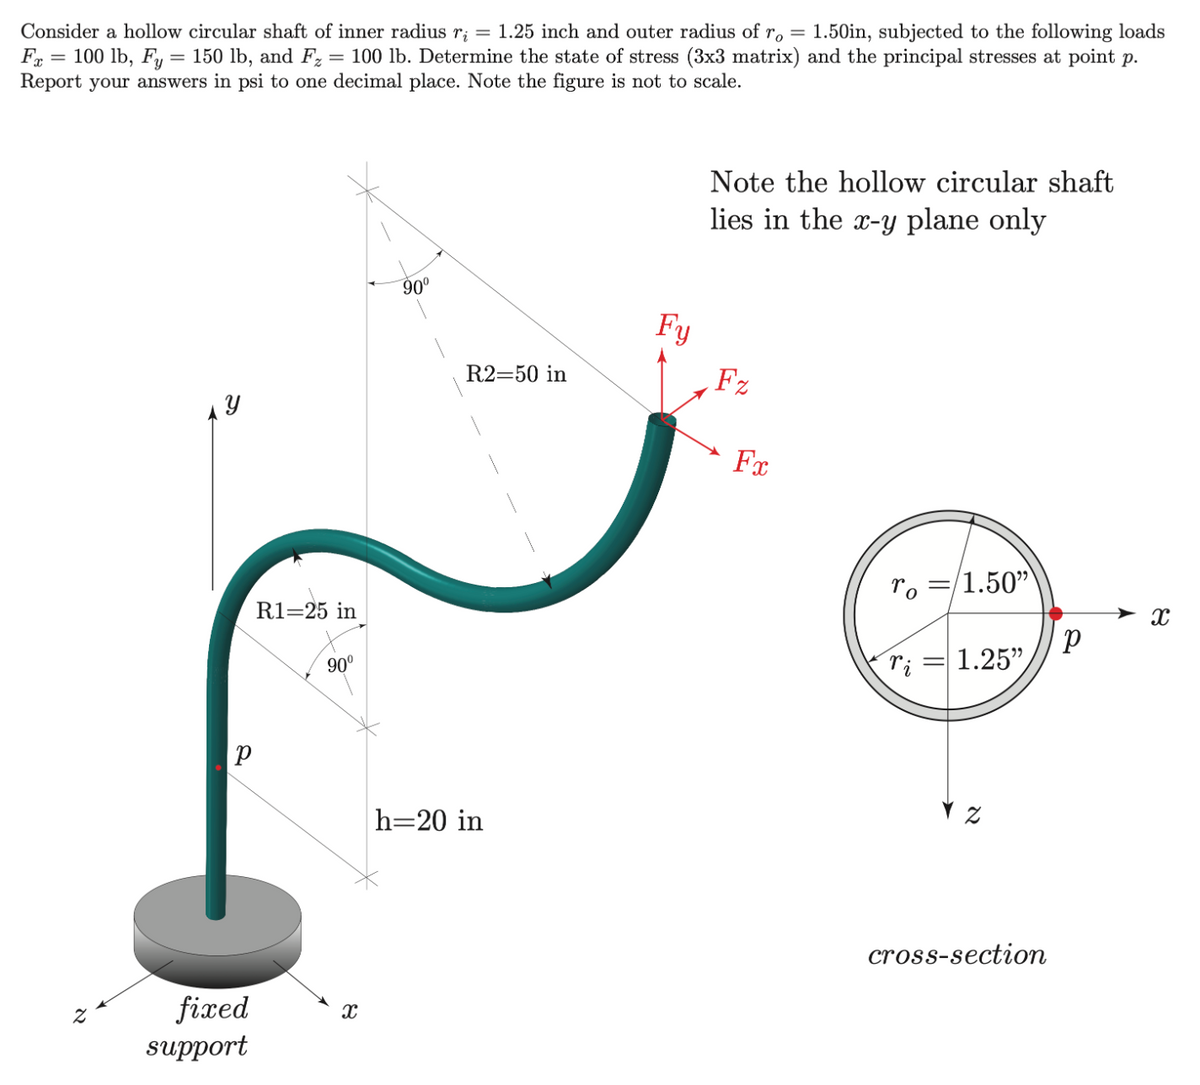 =
Consider a hollow circular shaft of inner radius r; = 1.25 inch and outer radius of ro 1.50in, subjected to the following loads
Fx = 100 lb, Fy = 150 lb, and F = 100 lb. Determine the state of stress (3x3 matrix) and the principal stresses at point p.
Report your answers in psi to one decimal place. Note the figure is not to scale.
у
P
fixed
support
R1-25 in
90⁰
X
90⁰
R2=50 in
h=20 in
Fy
Note the hollow circular shaft
lies in the x-y plane only
Fz
Fx
ro
ri
||
=
/1.50"
1.25"
YZ
cross-section
р
X